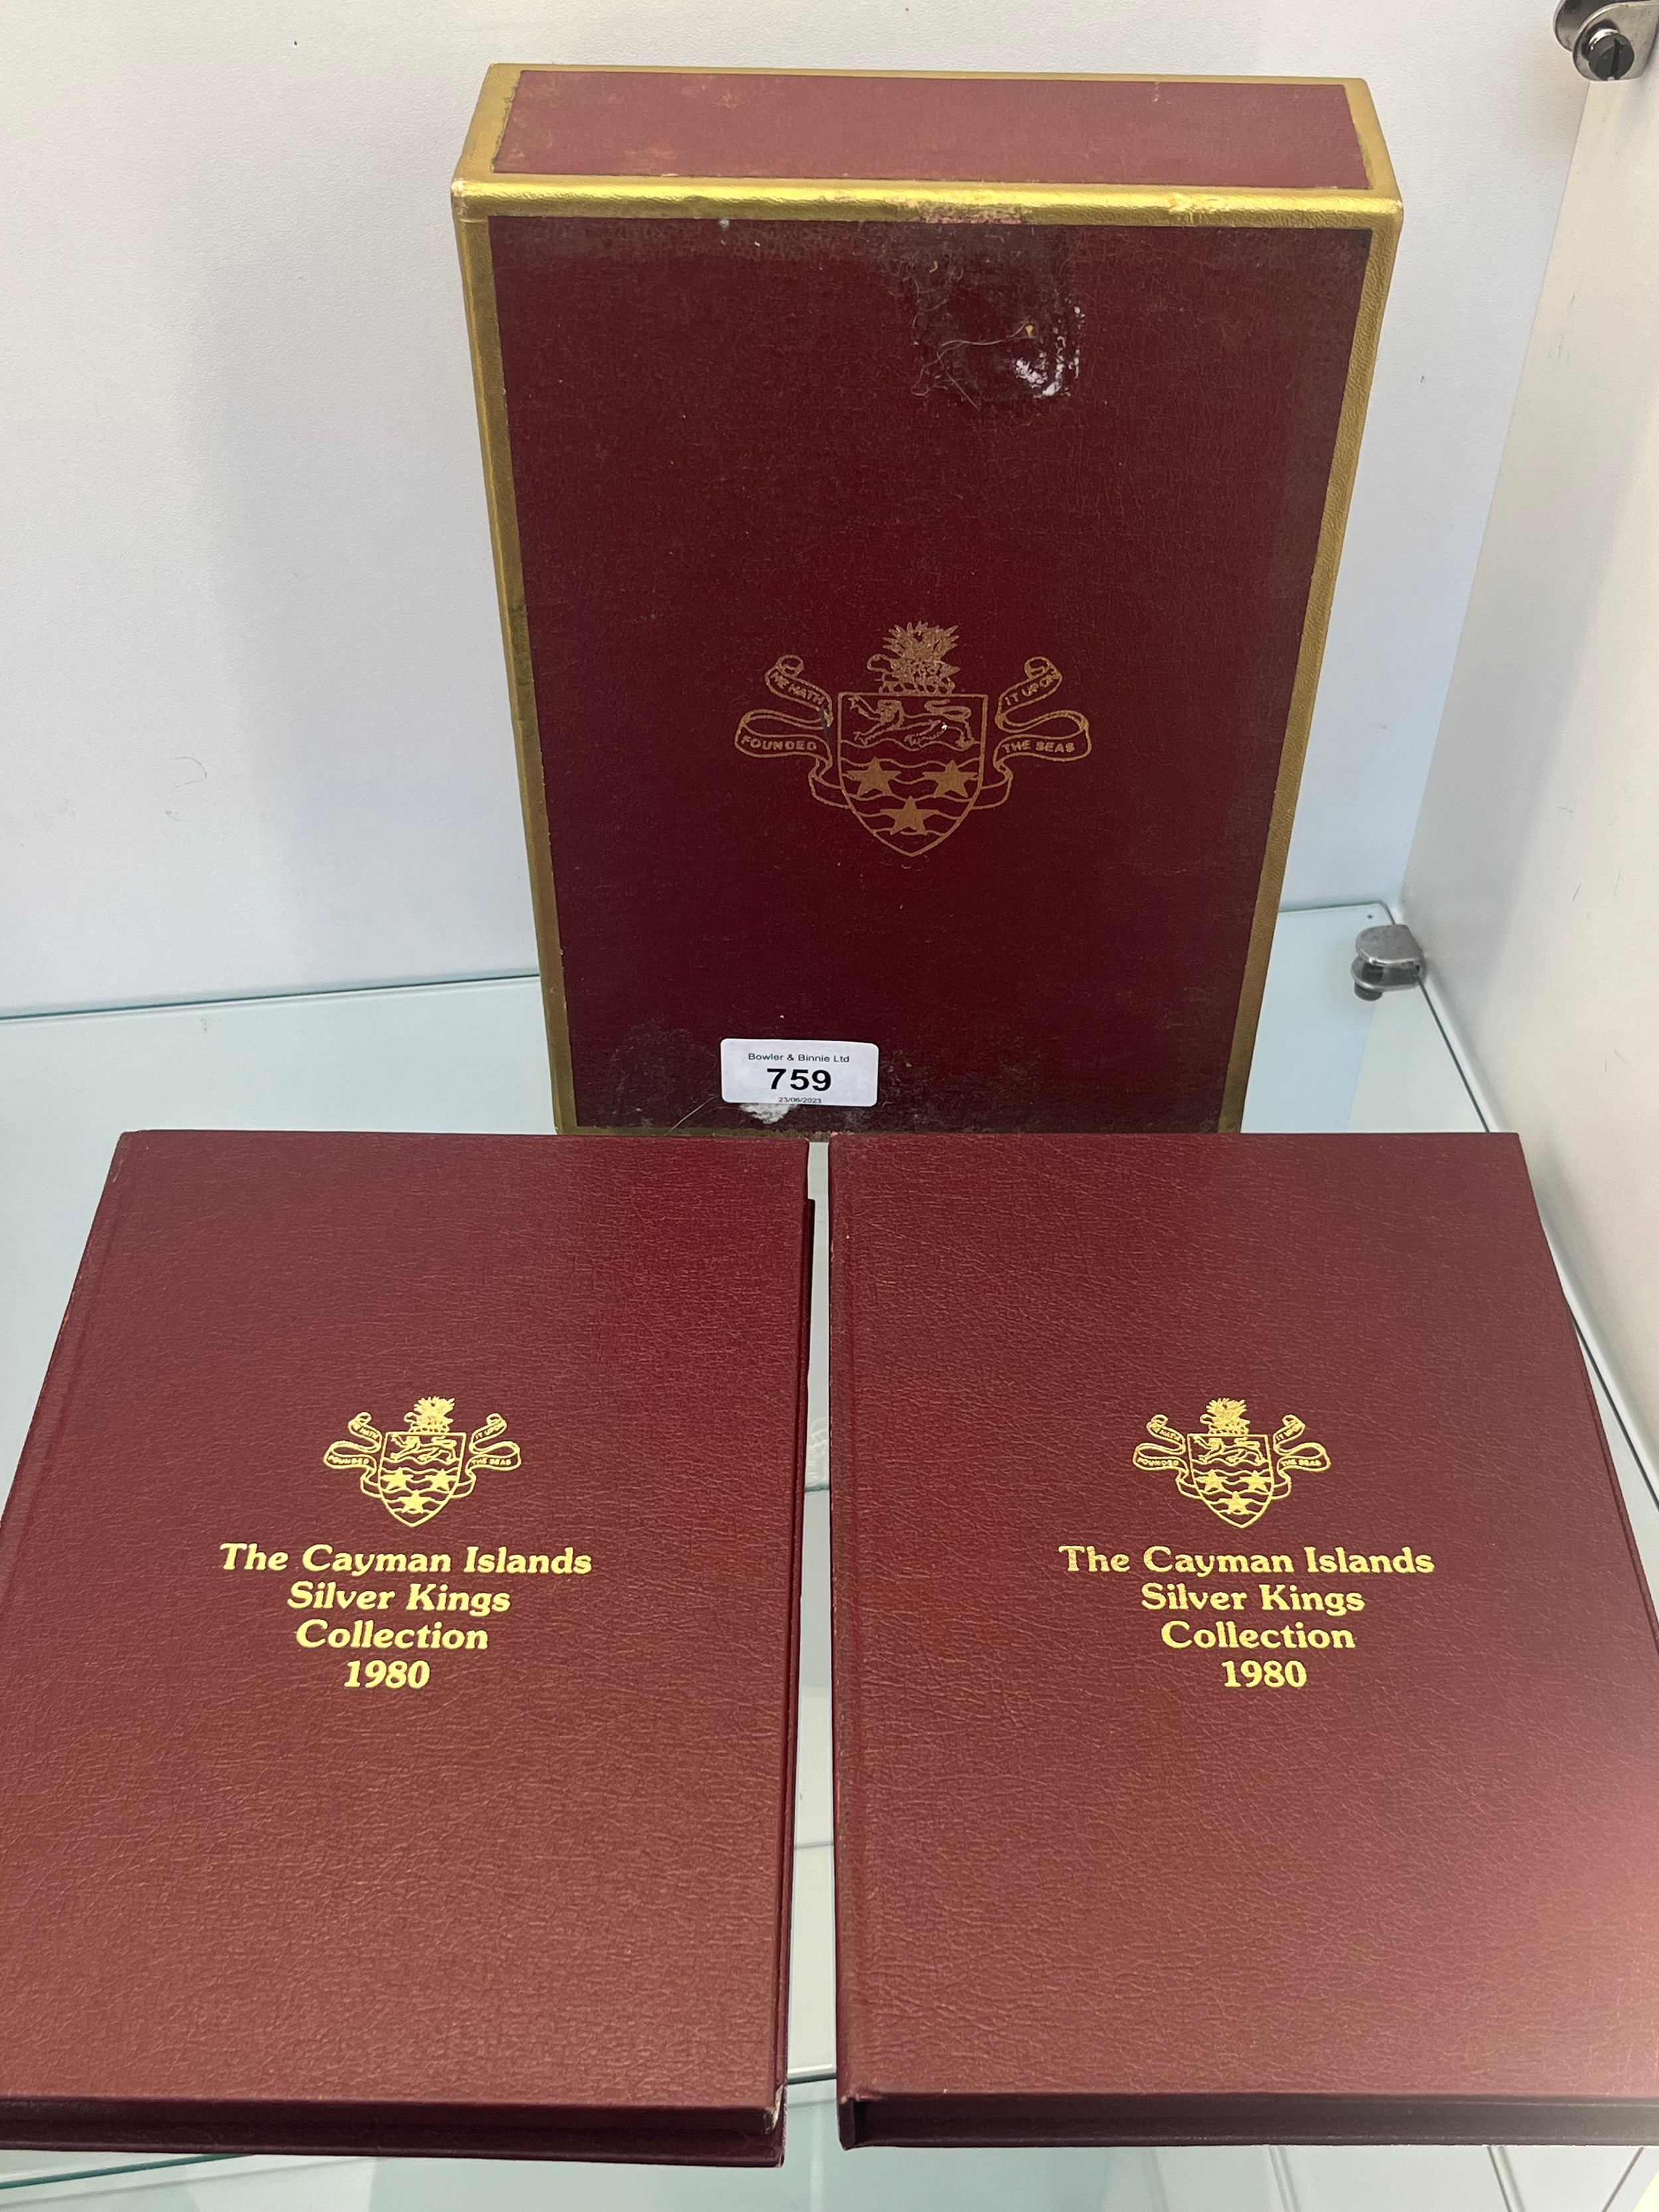 The Kings of England Collection 1980; Two boxed sets of the Cayman Islands Silver coins Kings